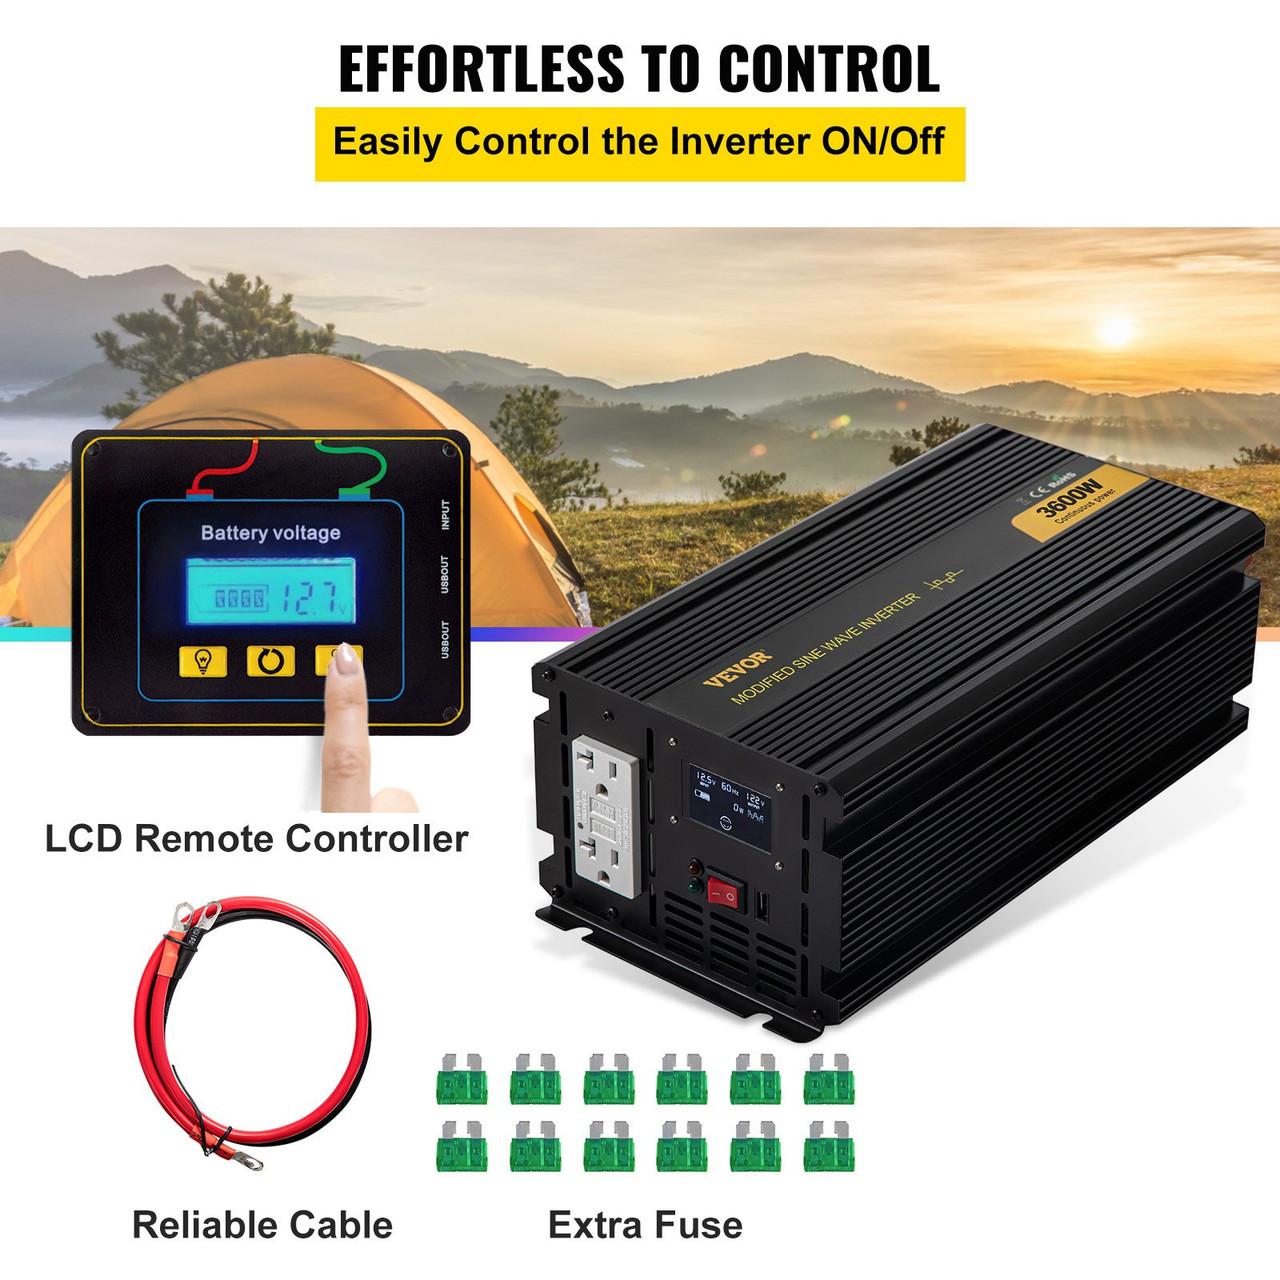 Power Inverter, 3600W Modified Sine Wave Inverter, DC 12V to AC 120V Car Converter, with LCD Display, Remote Controller, LED Indicator, GFCI Outlets Inverter for Truck RV Car Boat Travel Camping